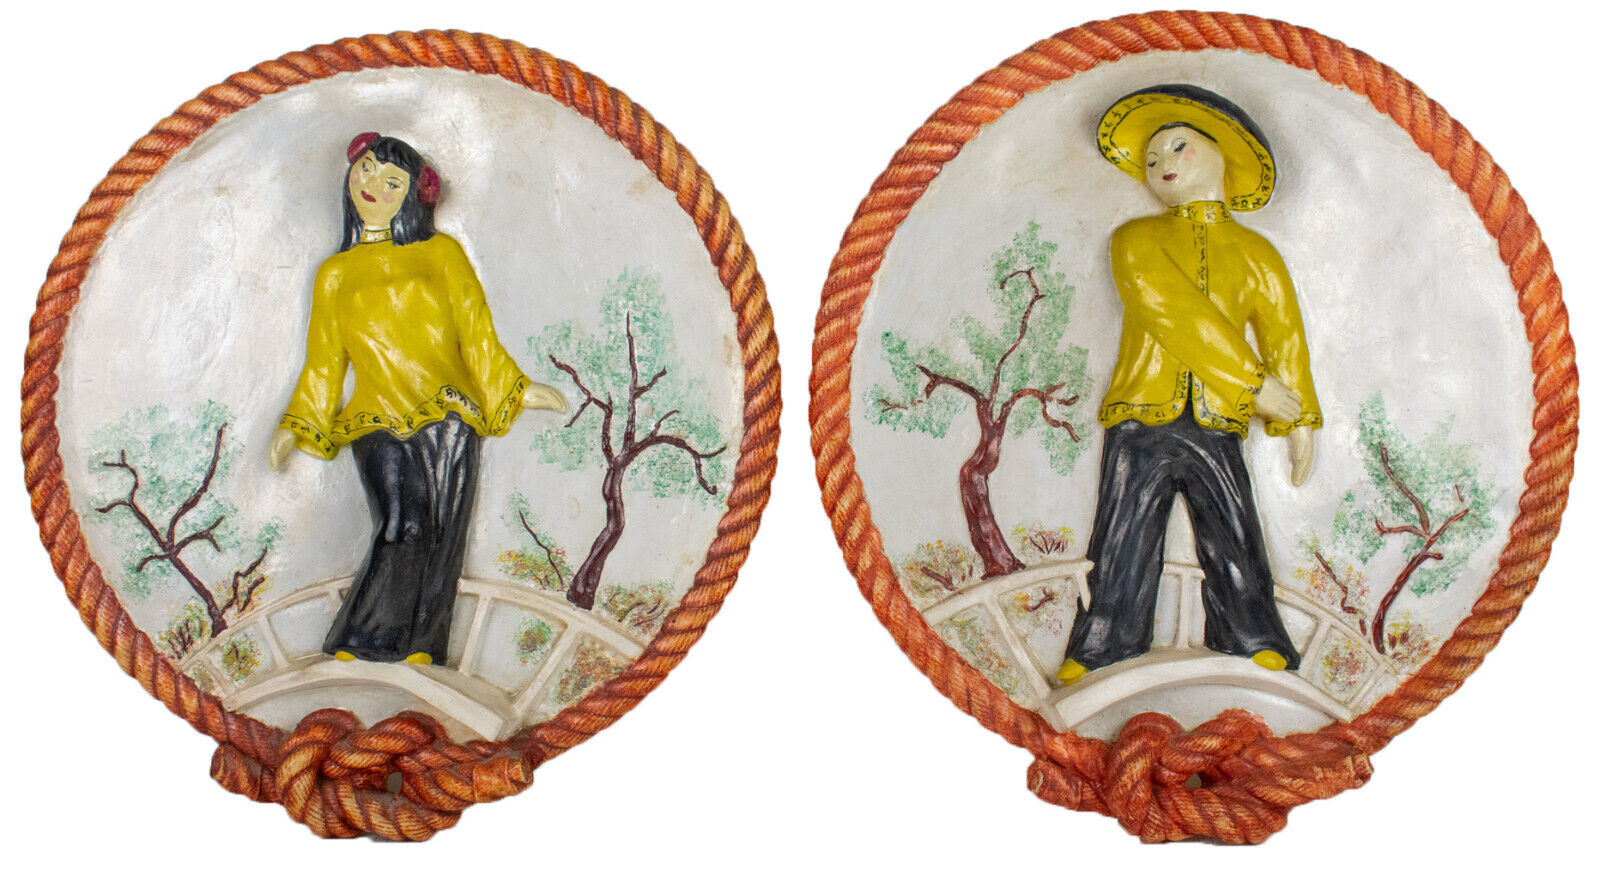 Pair of 1950's Asian 3D Pictorial Wall Art, Round Figural Plaster Plaque, Rope